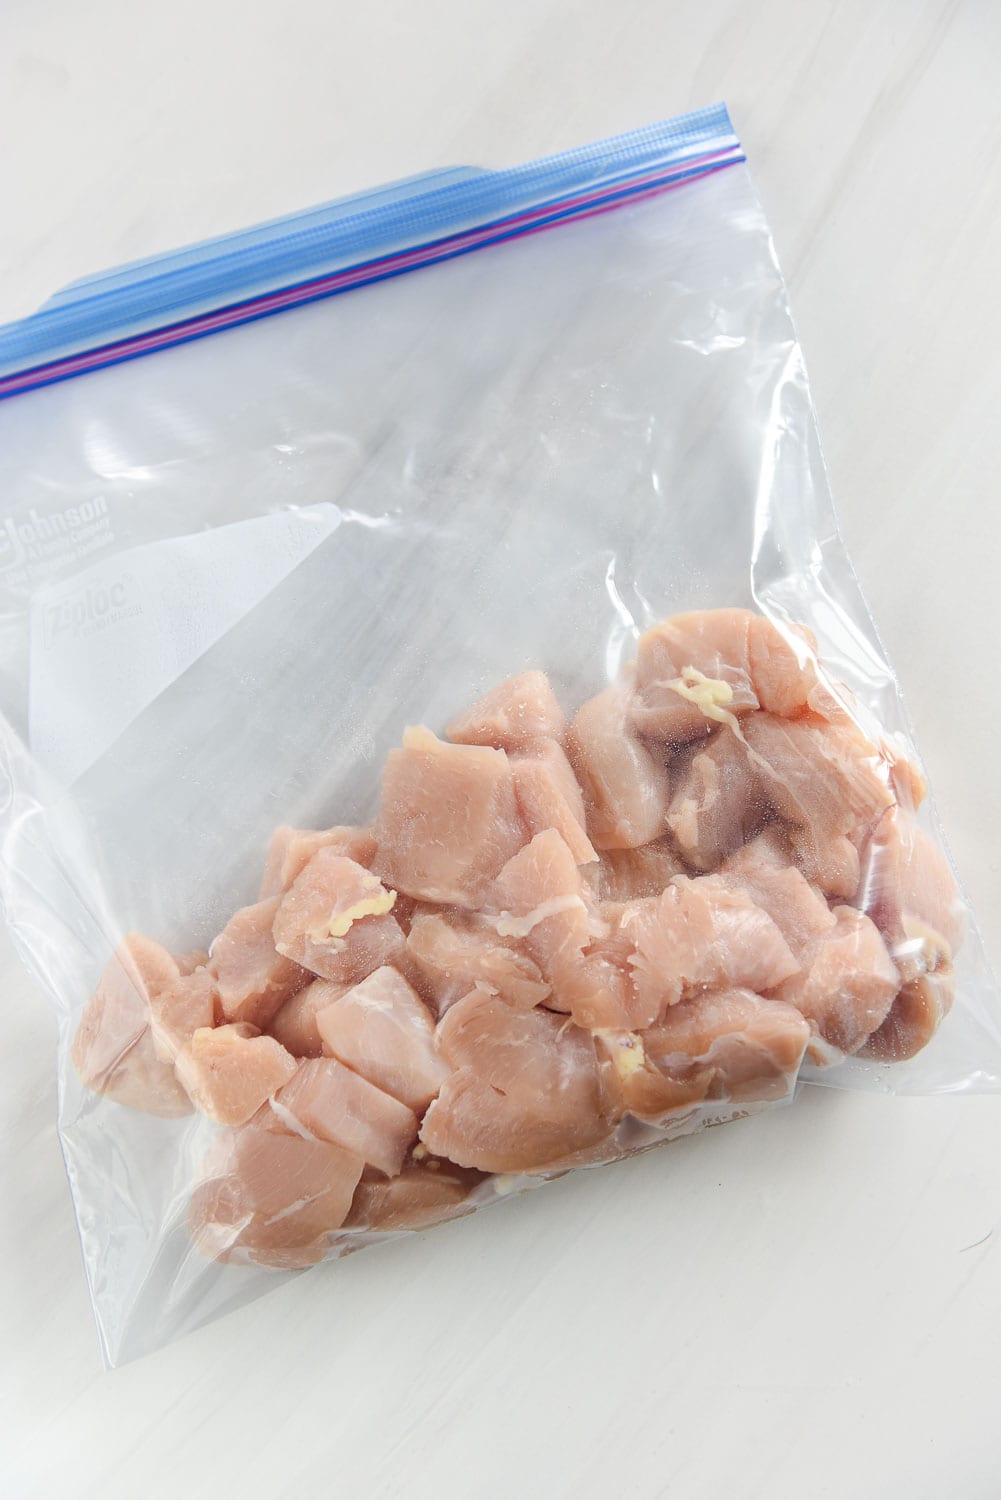 Freezer bag with cut up chicken breasts